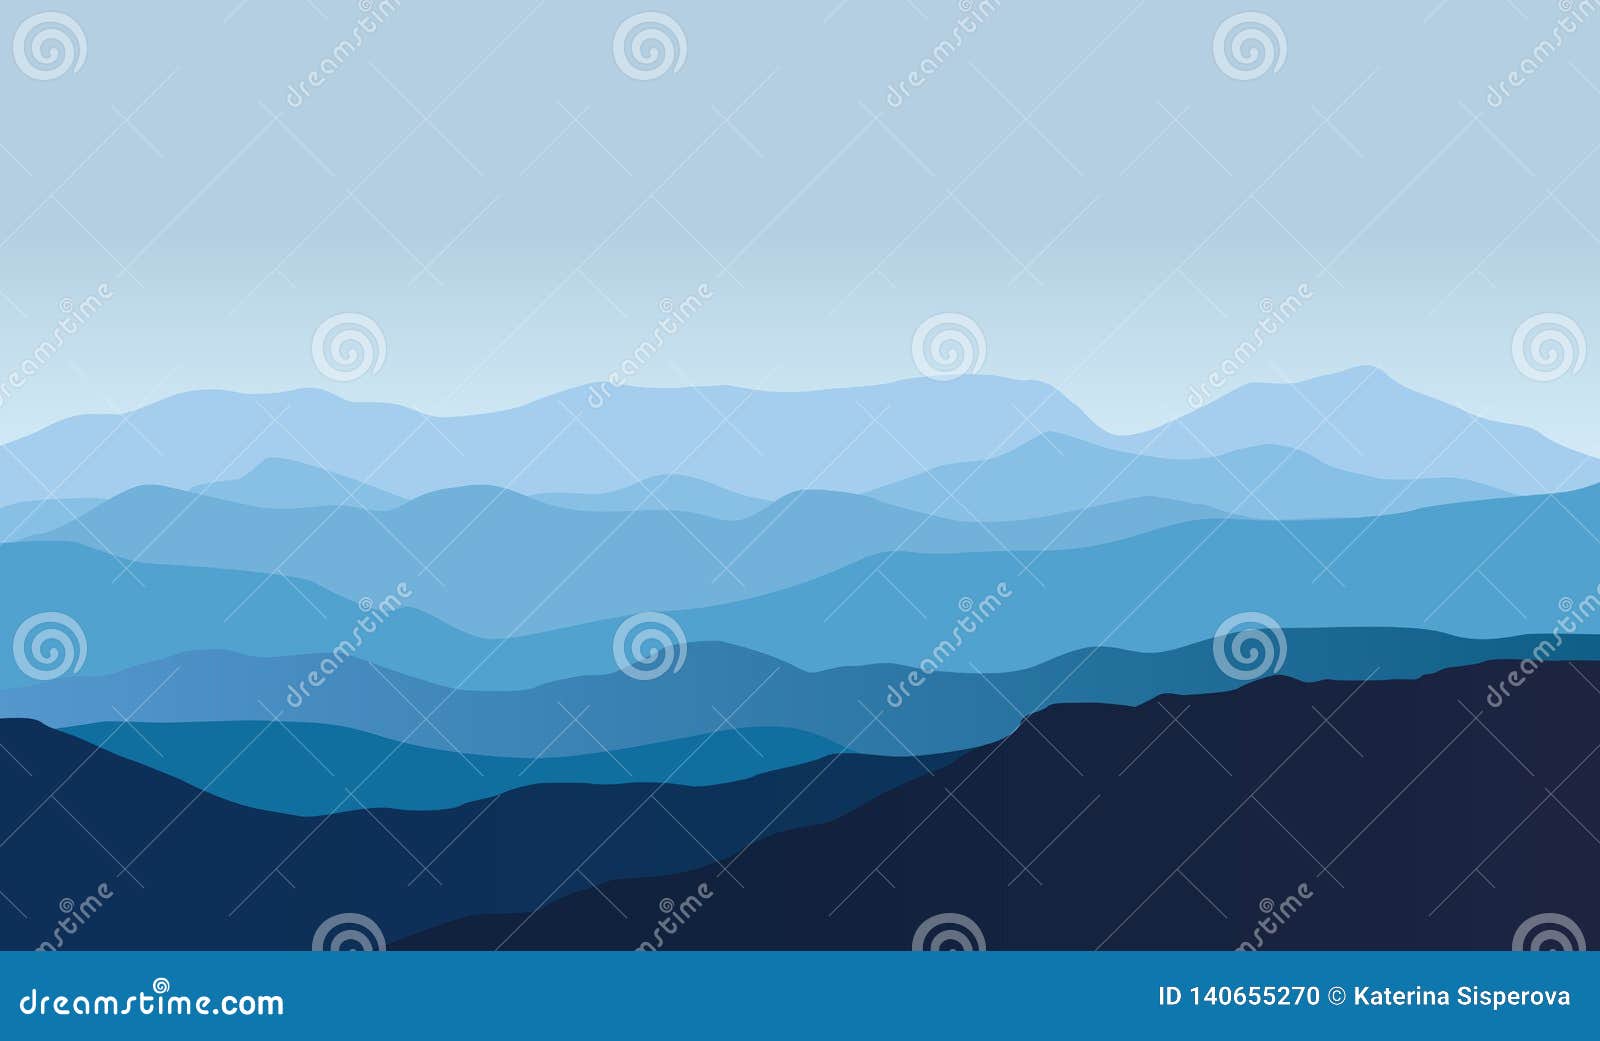 blue  landscape with silhouettes of misty mountains